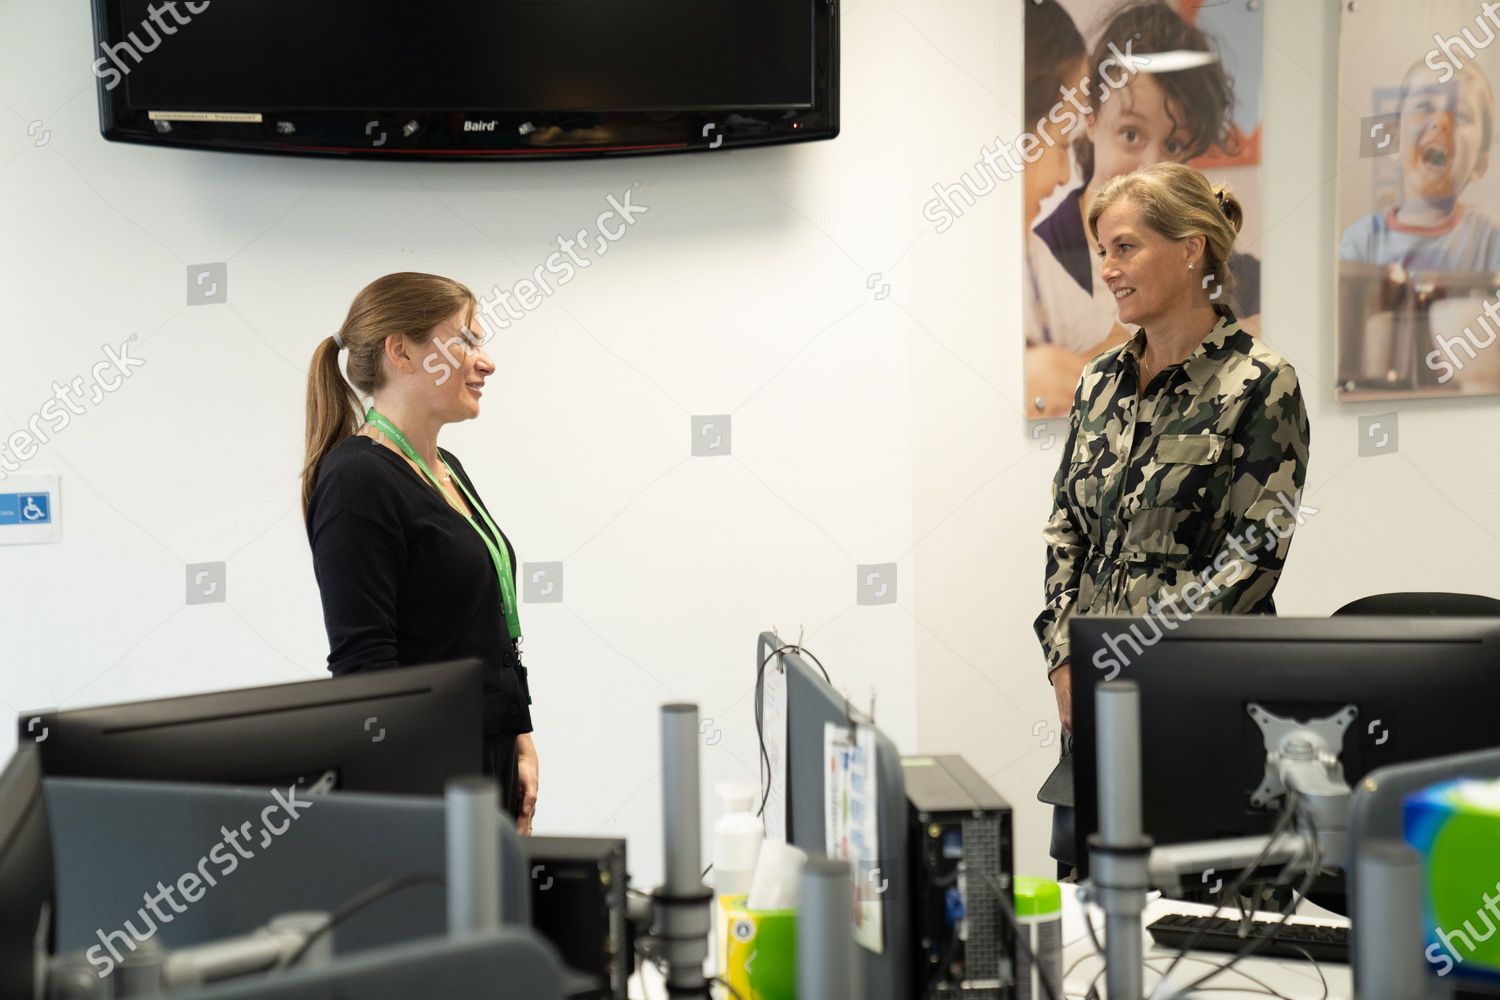 sophie-countess-of-wessex-joins-a-counselling-shift-at-childline-nspcc-hq-london-uk-shutterstock-editorial-10682513d.jpg